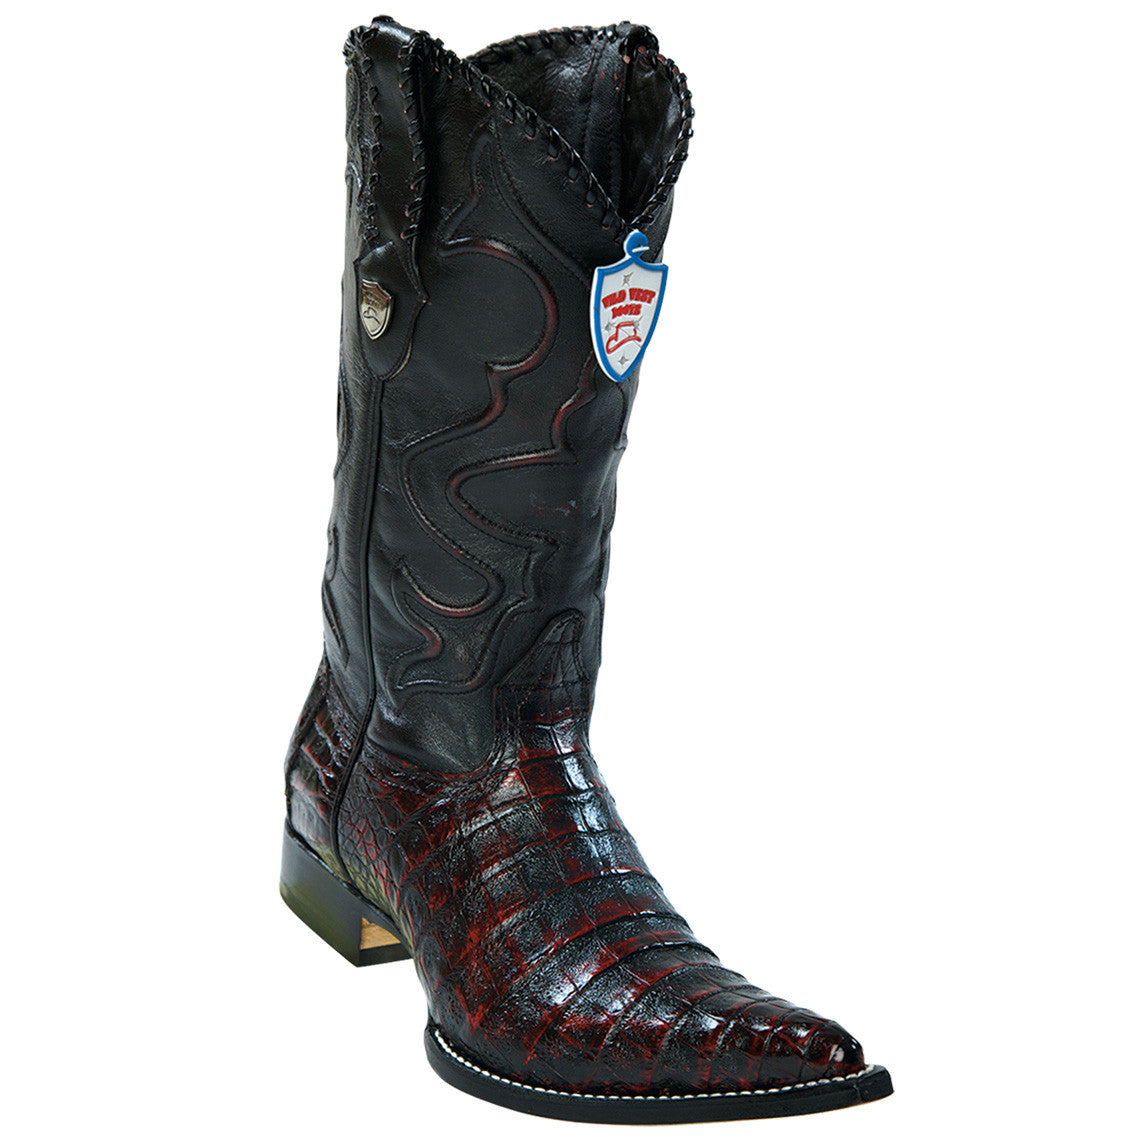 Caiman Belly Cowboy Boots 3x Toe